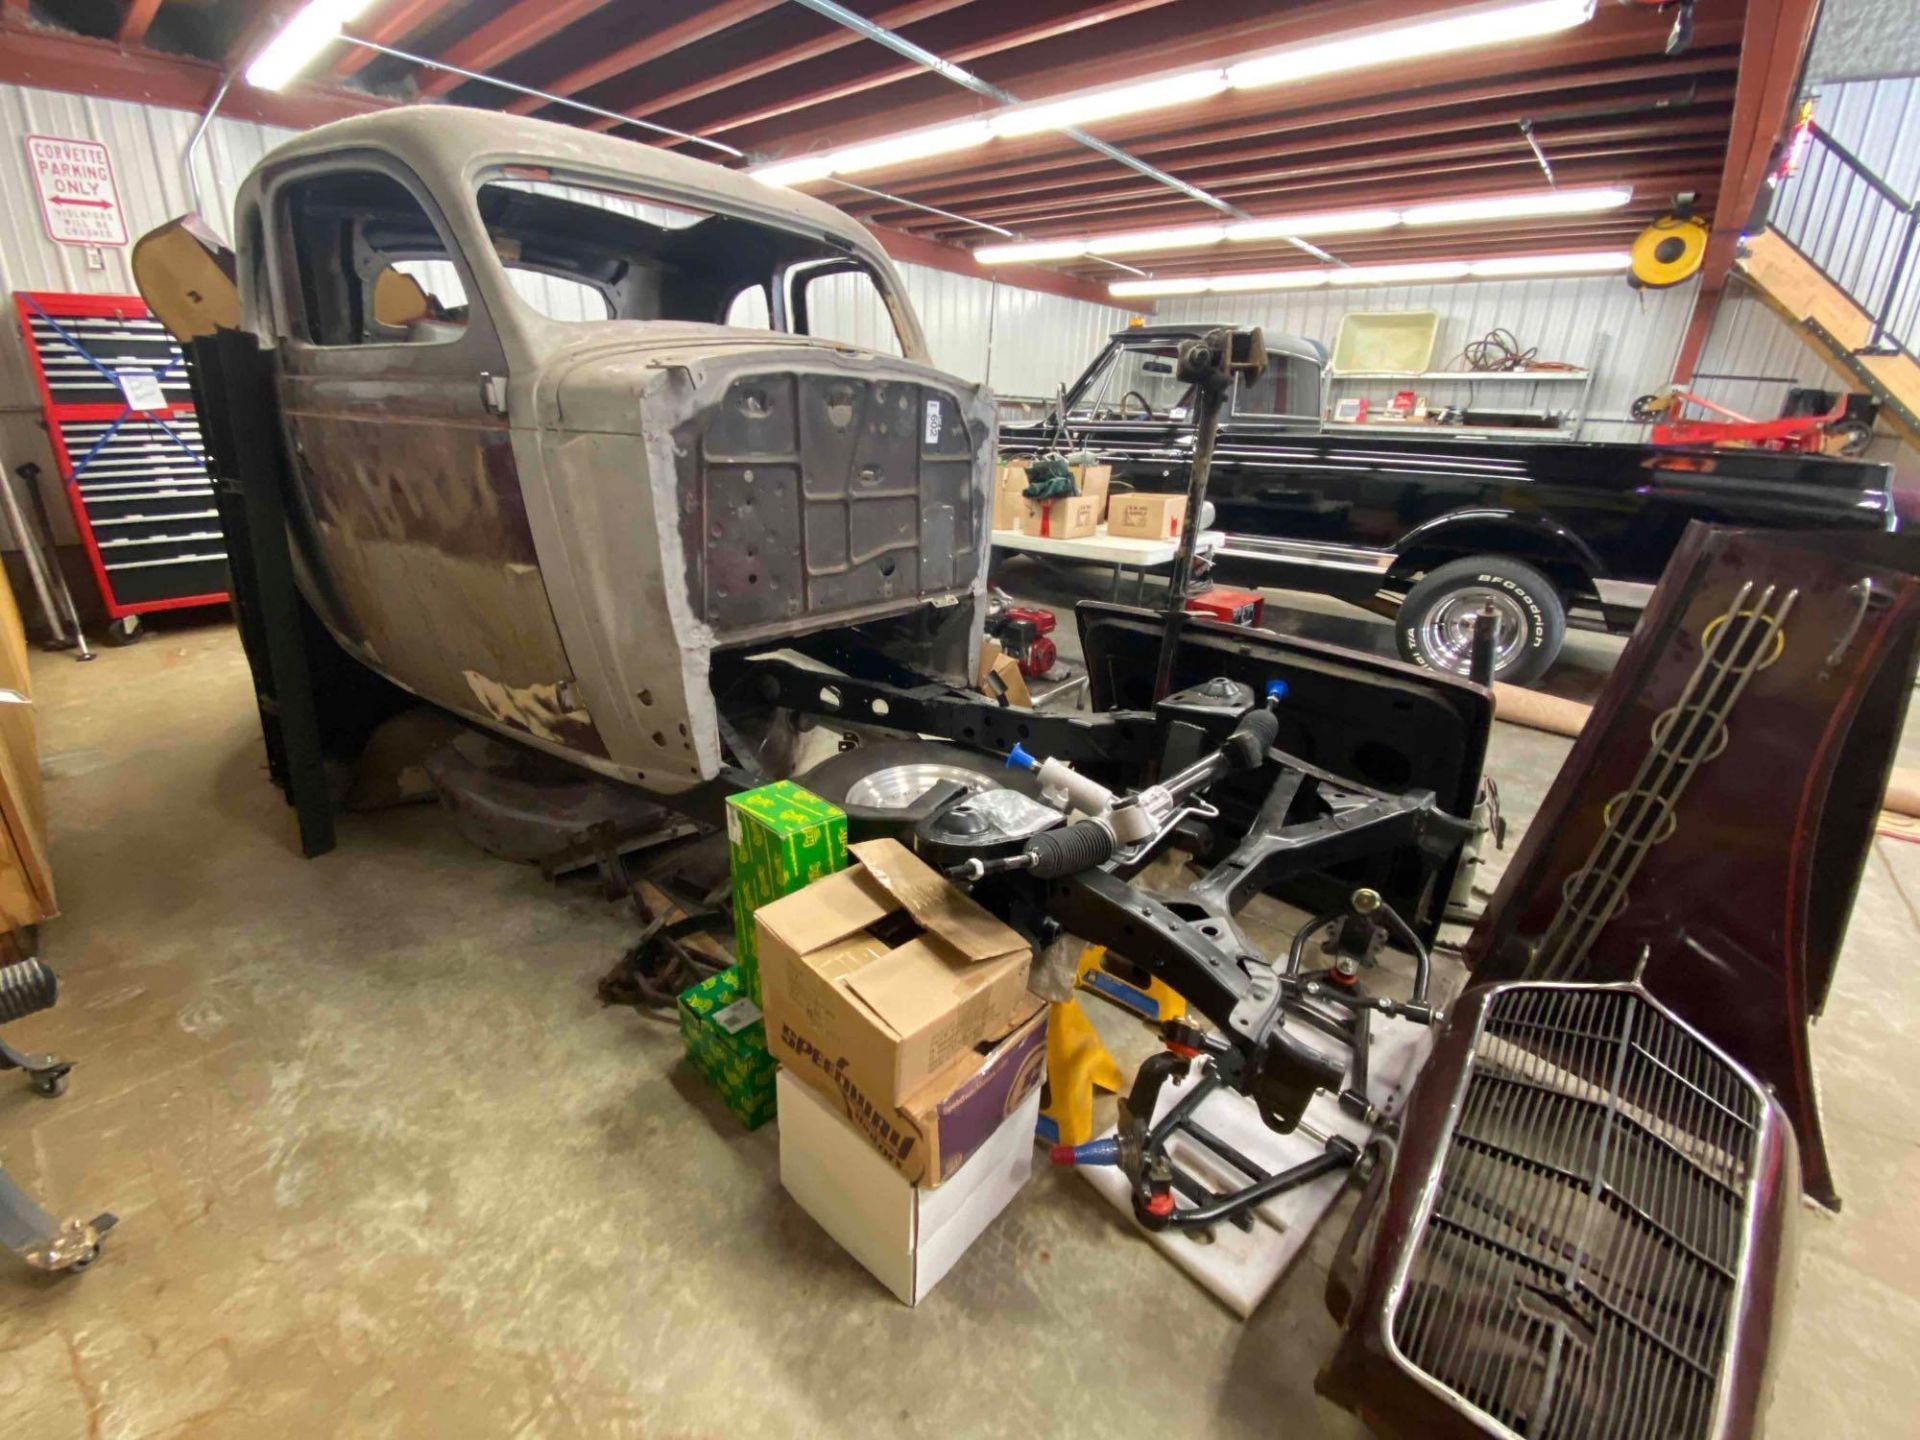 ’35 Plymouth Coupe Including Body Panels, Frame, Lights, etc. ***No Engine, Transmission, etc.*** - Image 5 of 16